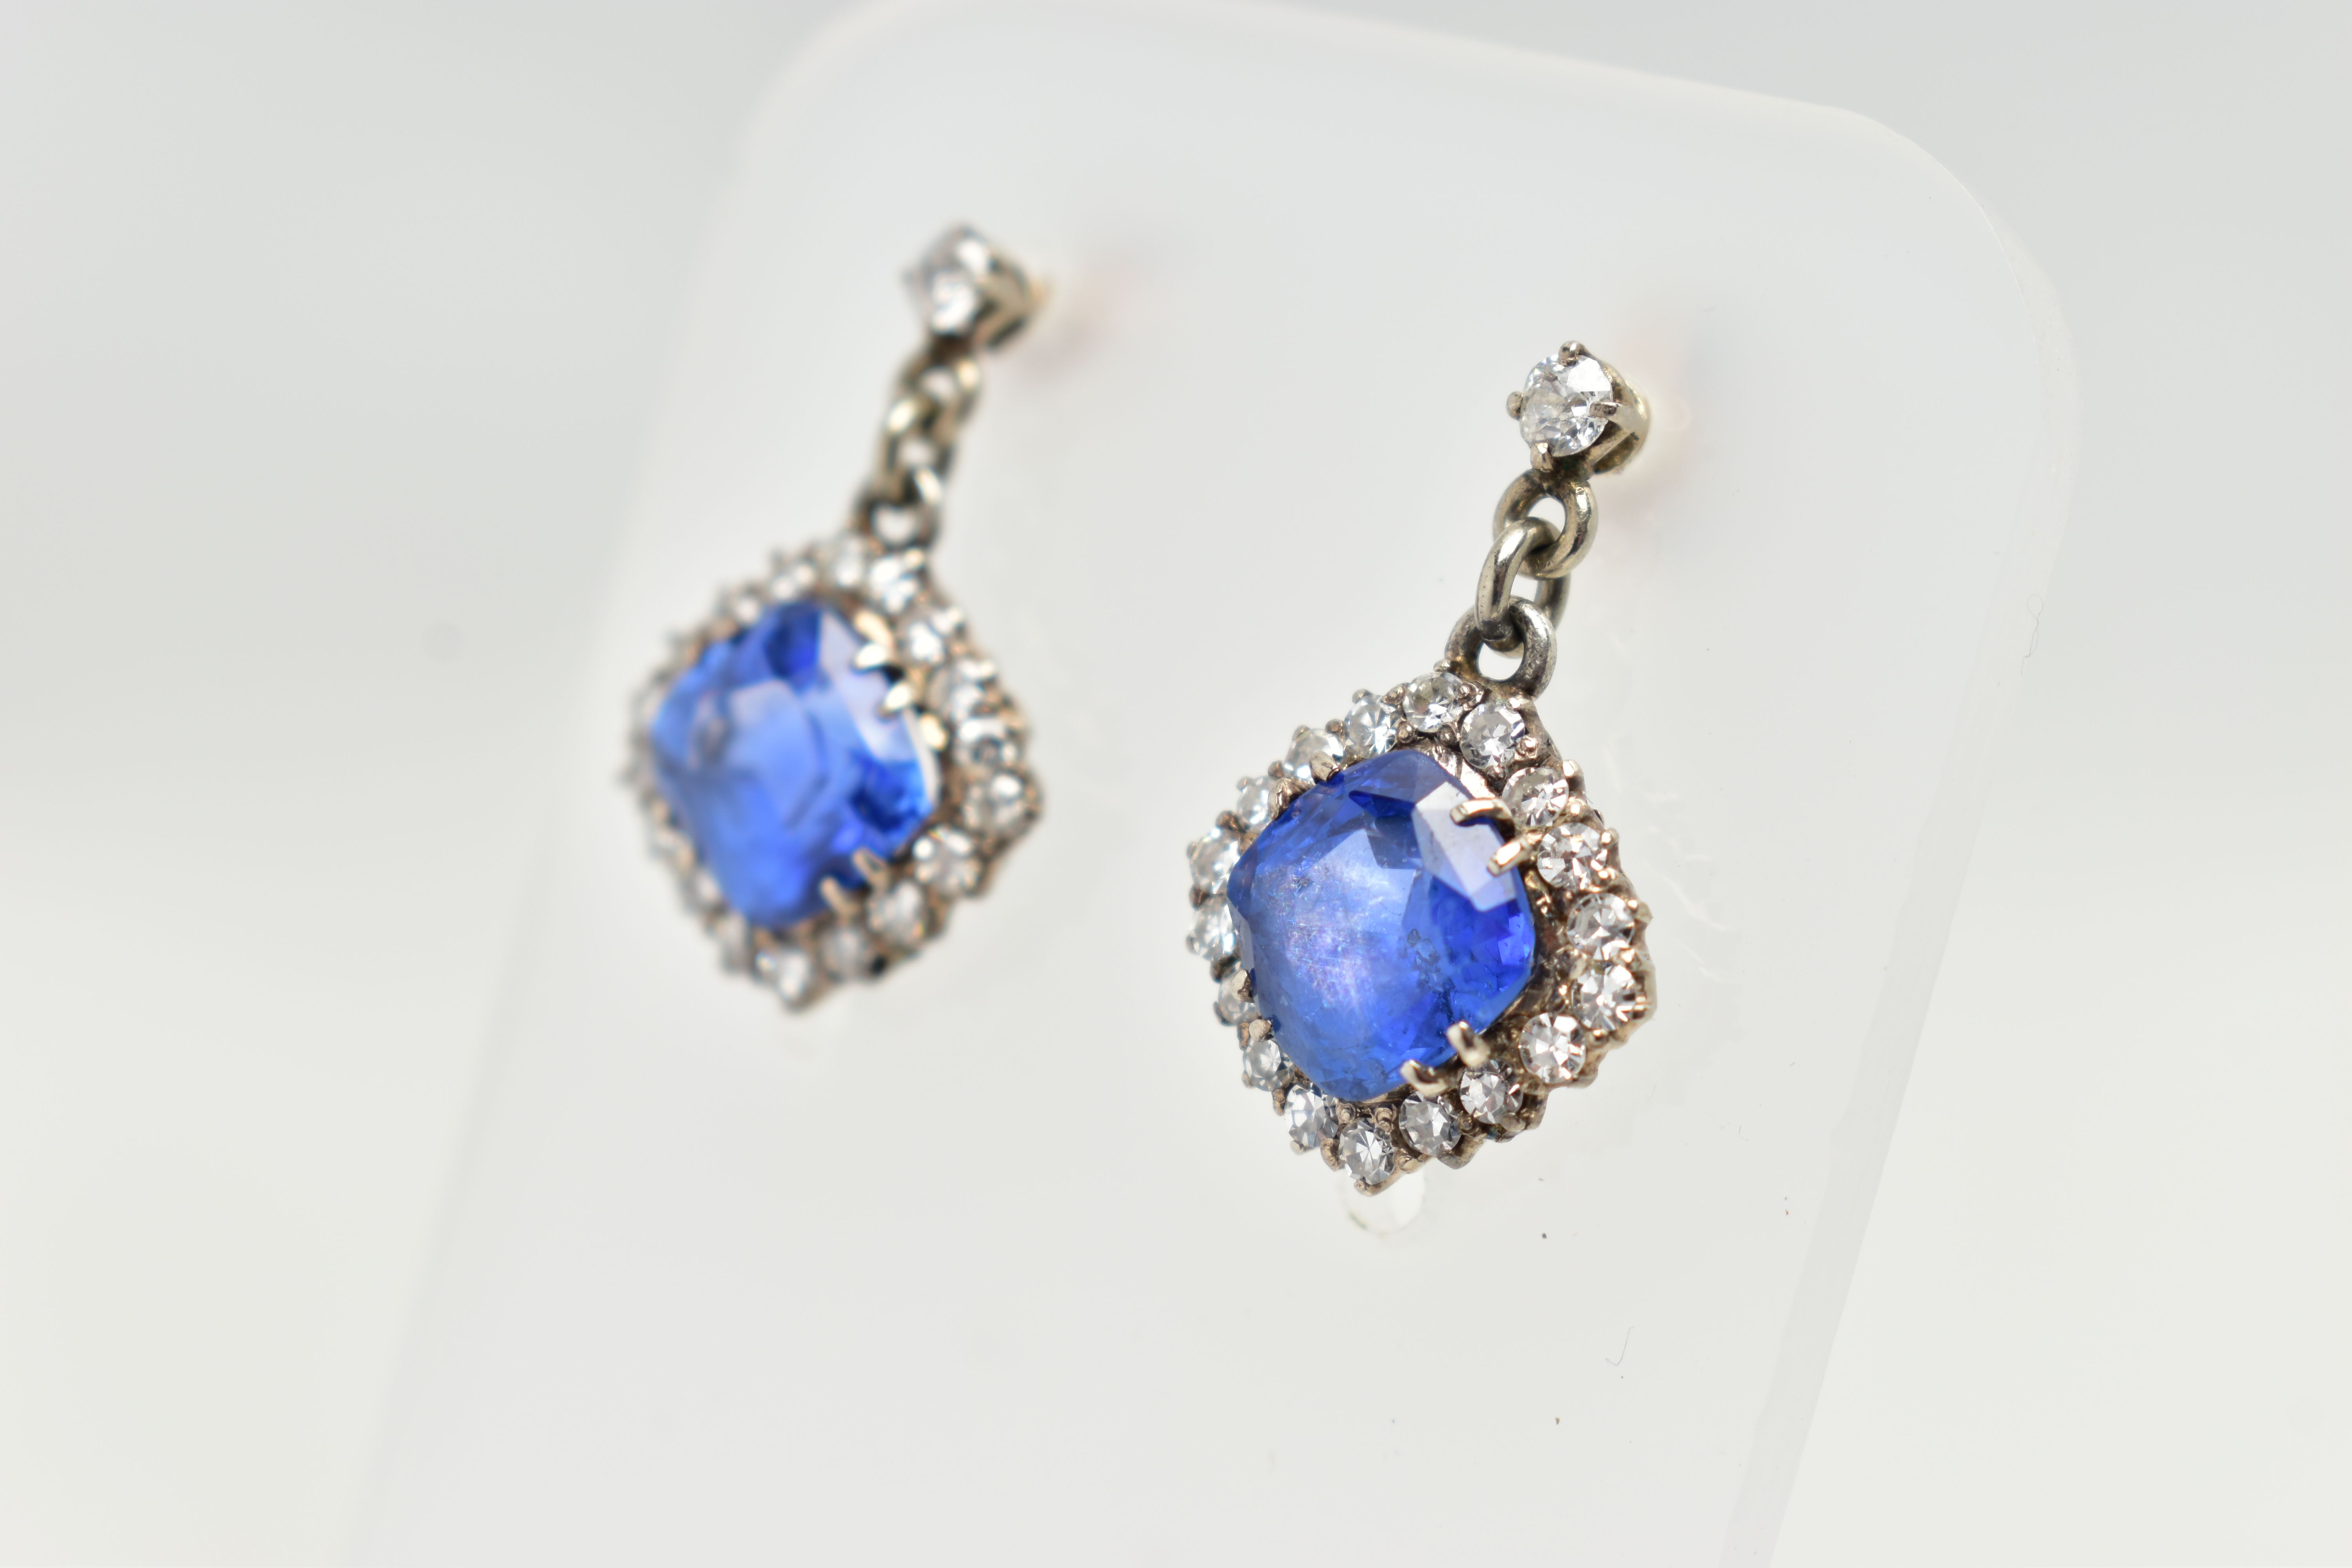 A PAIR OF EARLY 20TH CENTURY SAPPHIRE AND DIAMOND EARRINGS, each earring set with a cushion cut - Image 7 of 11